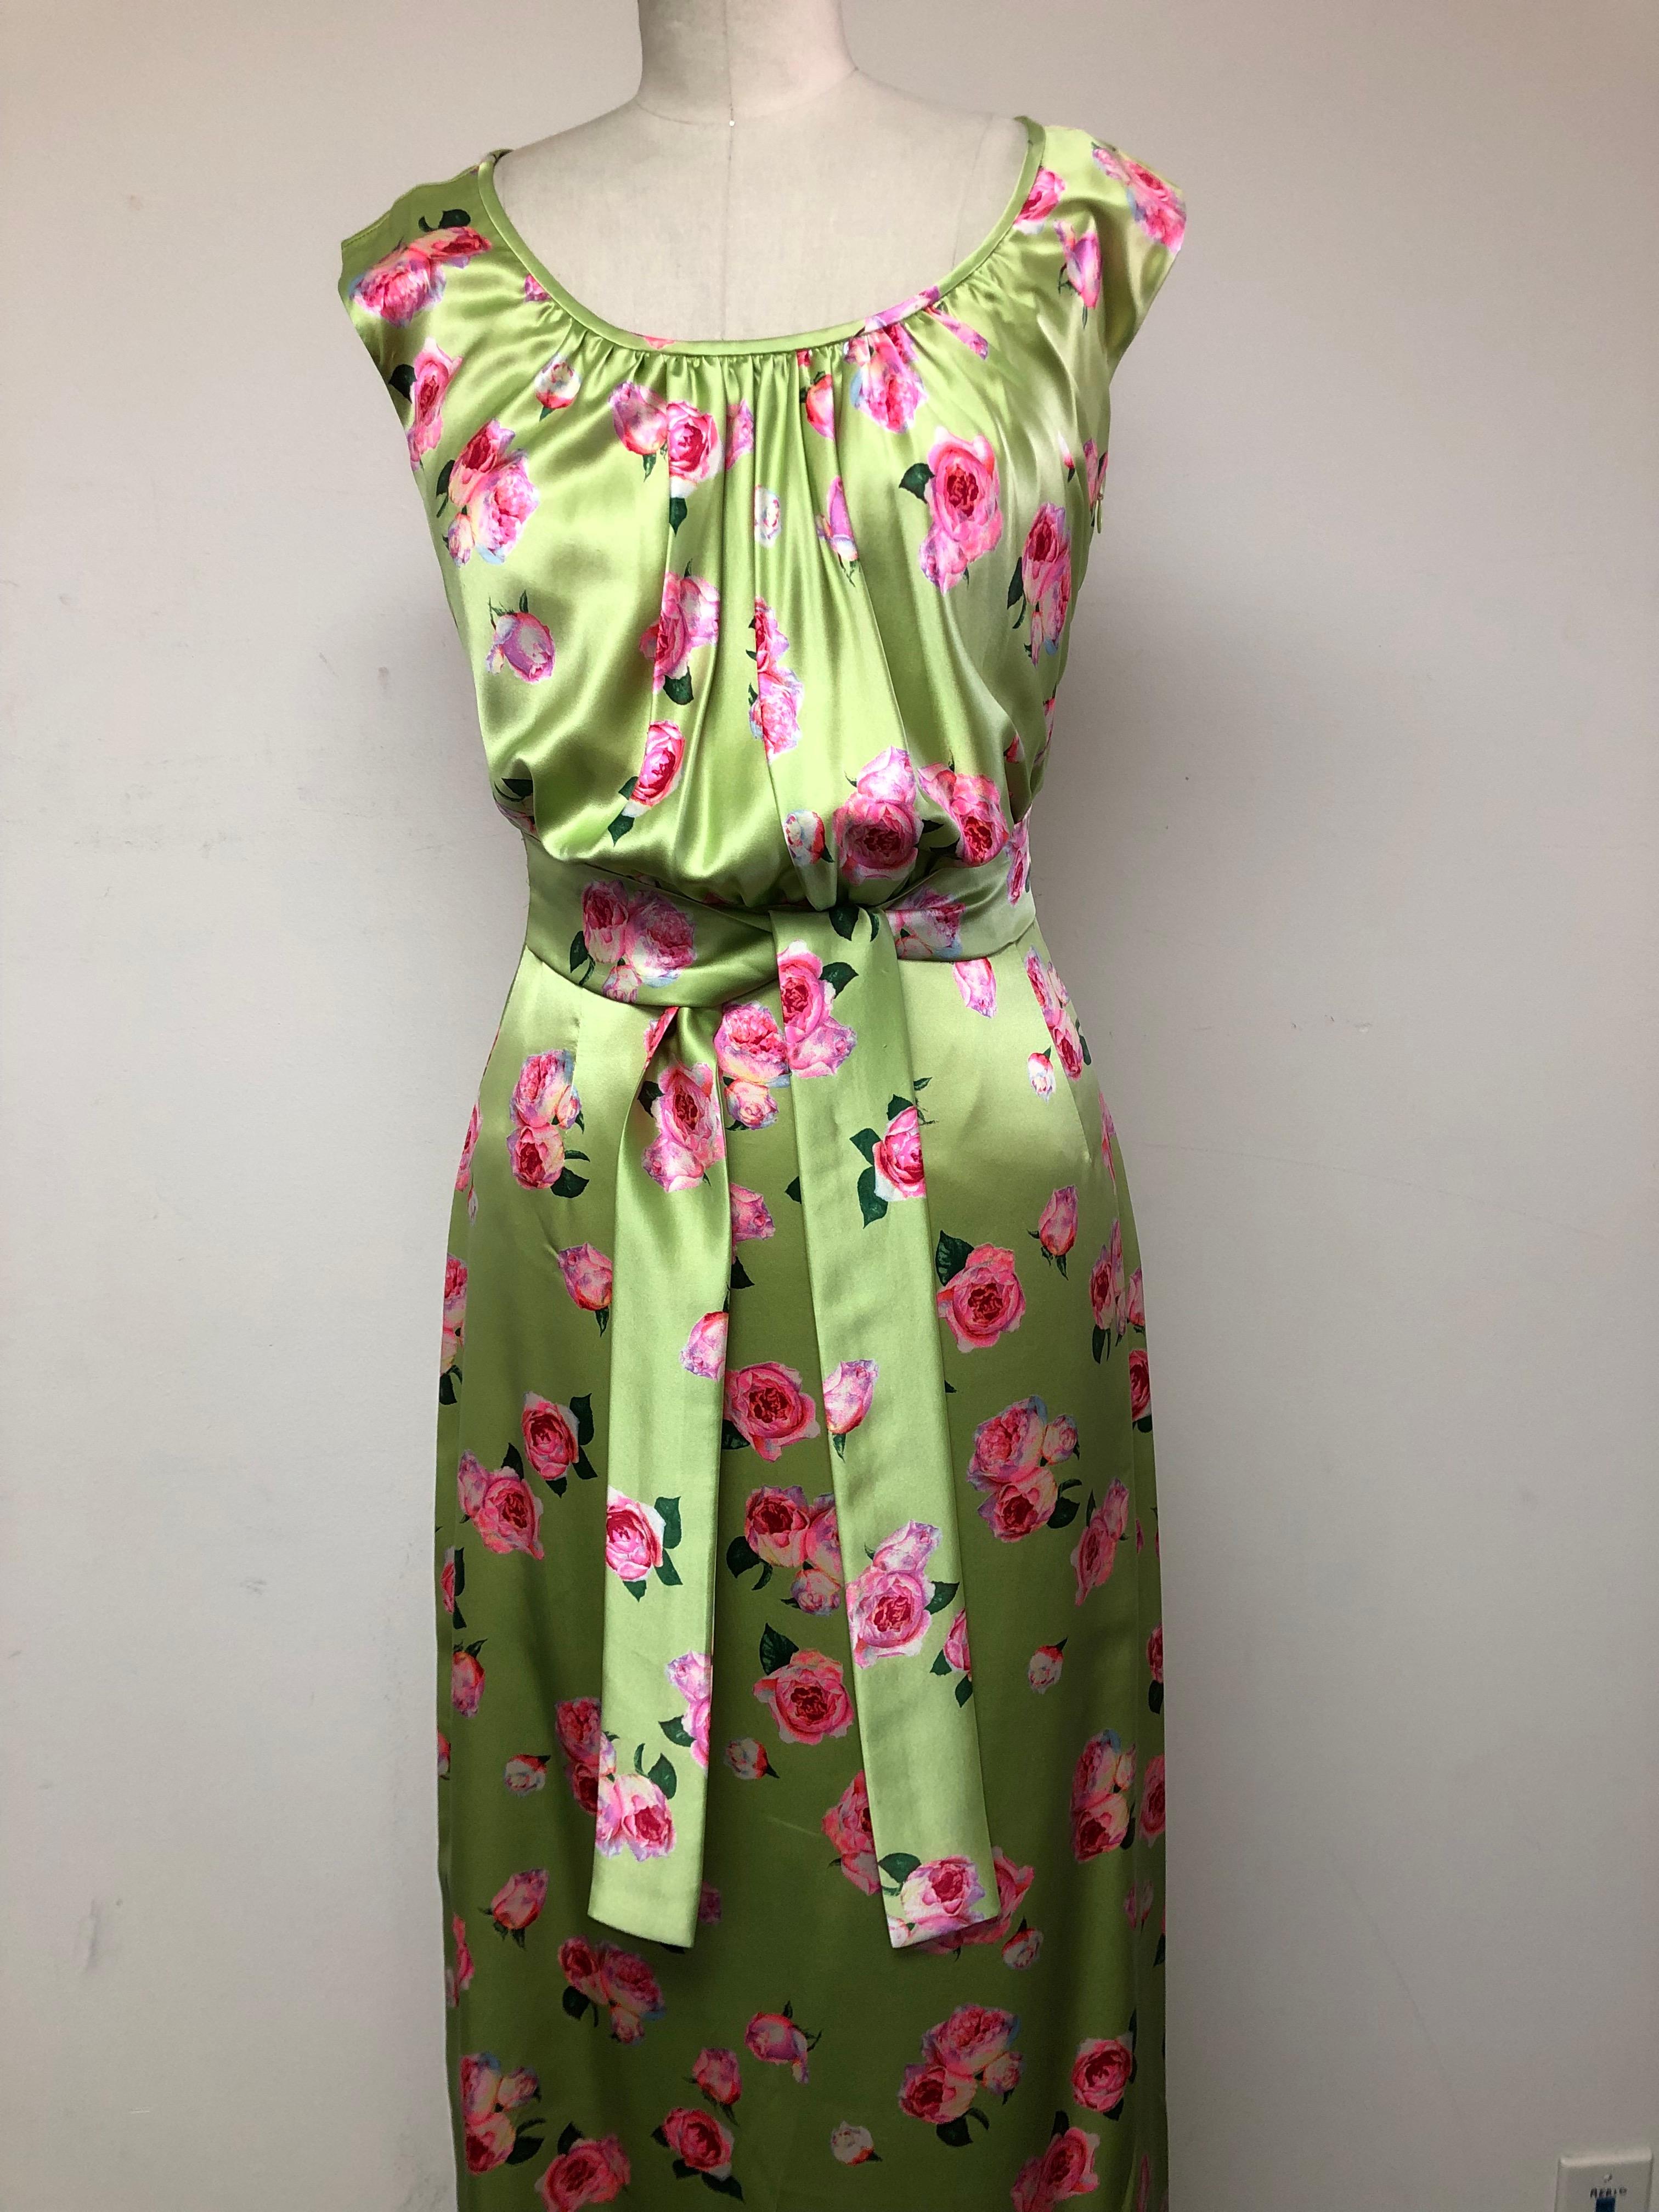 100% Silk Charmeuse from Frontline Zurich..maker of Hermes scarves.
Delightfully animated pink roses scattered 
throughout the pale green blouson dress. Front self tie belt which can also be tied in back. The blouson bodice 
and soft drape is a wink